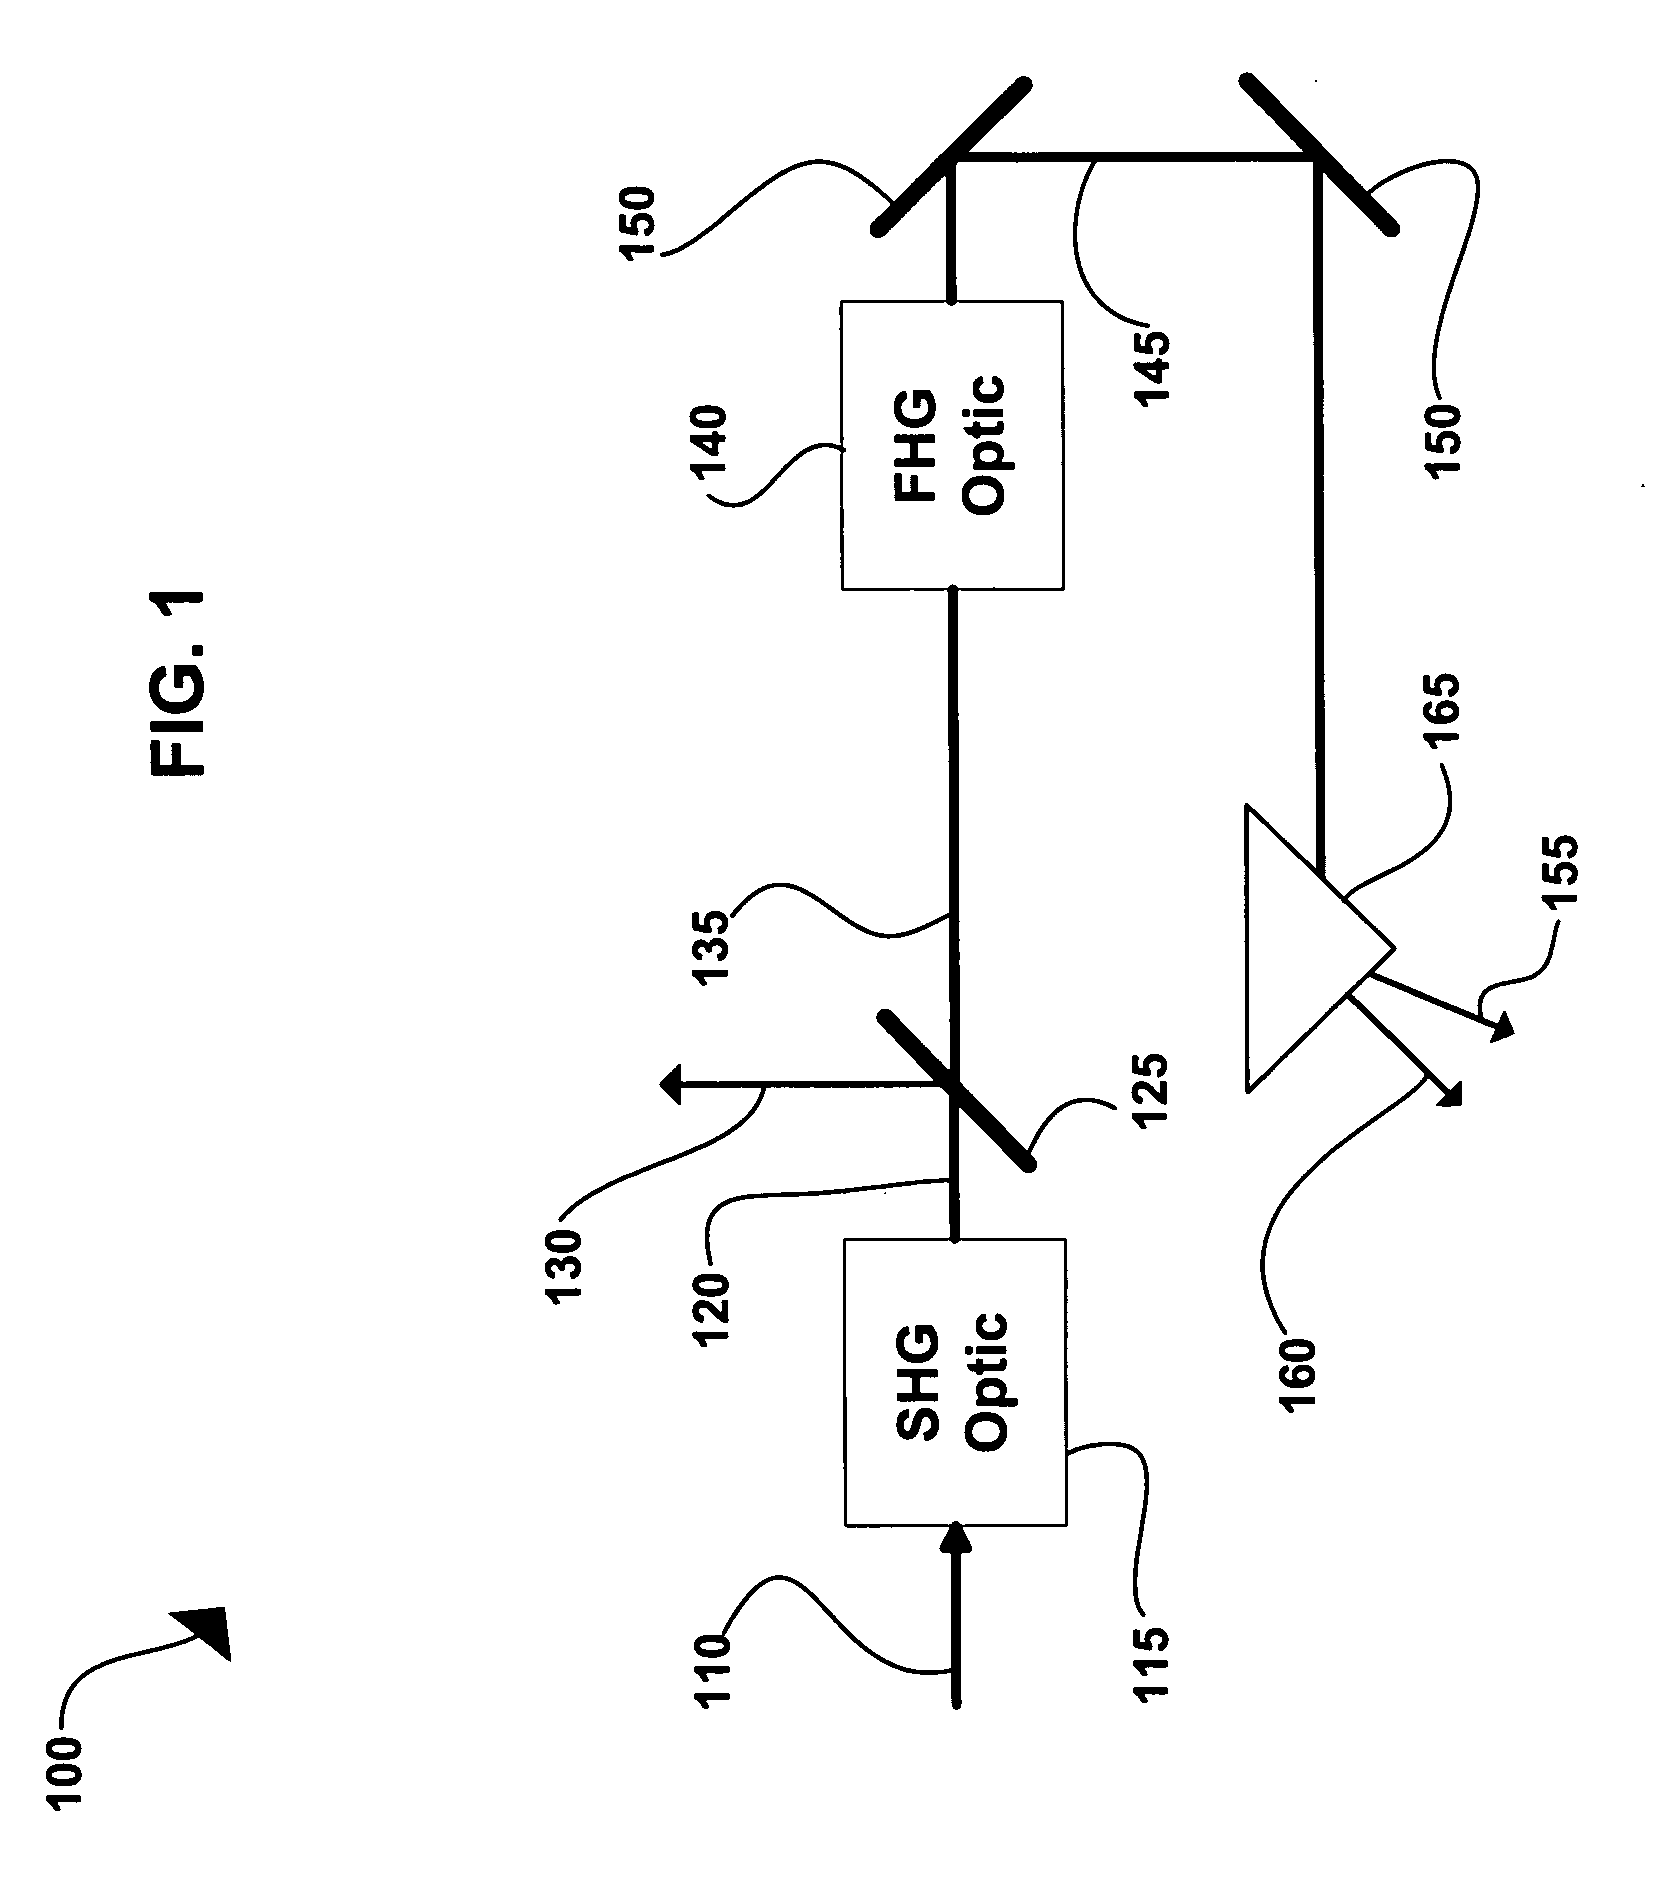 Solid state system and method for generating ultraviolet light